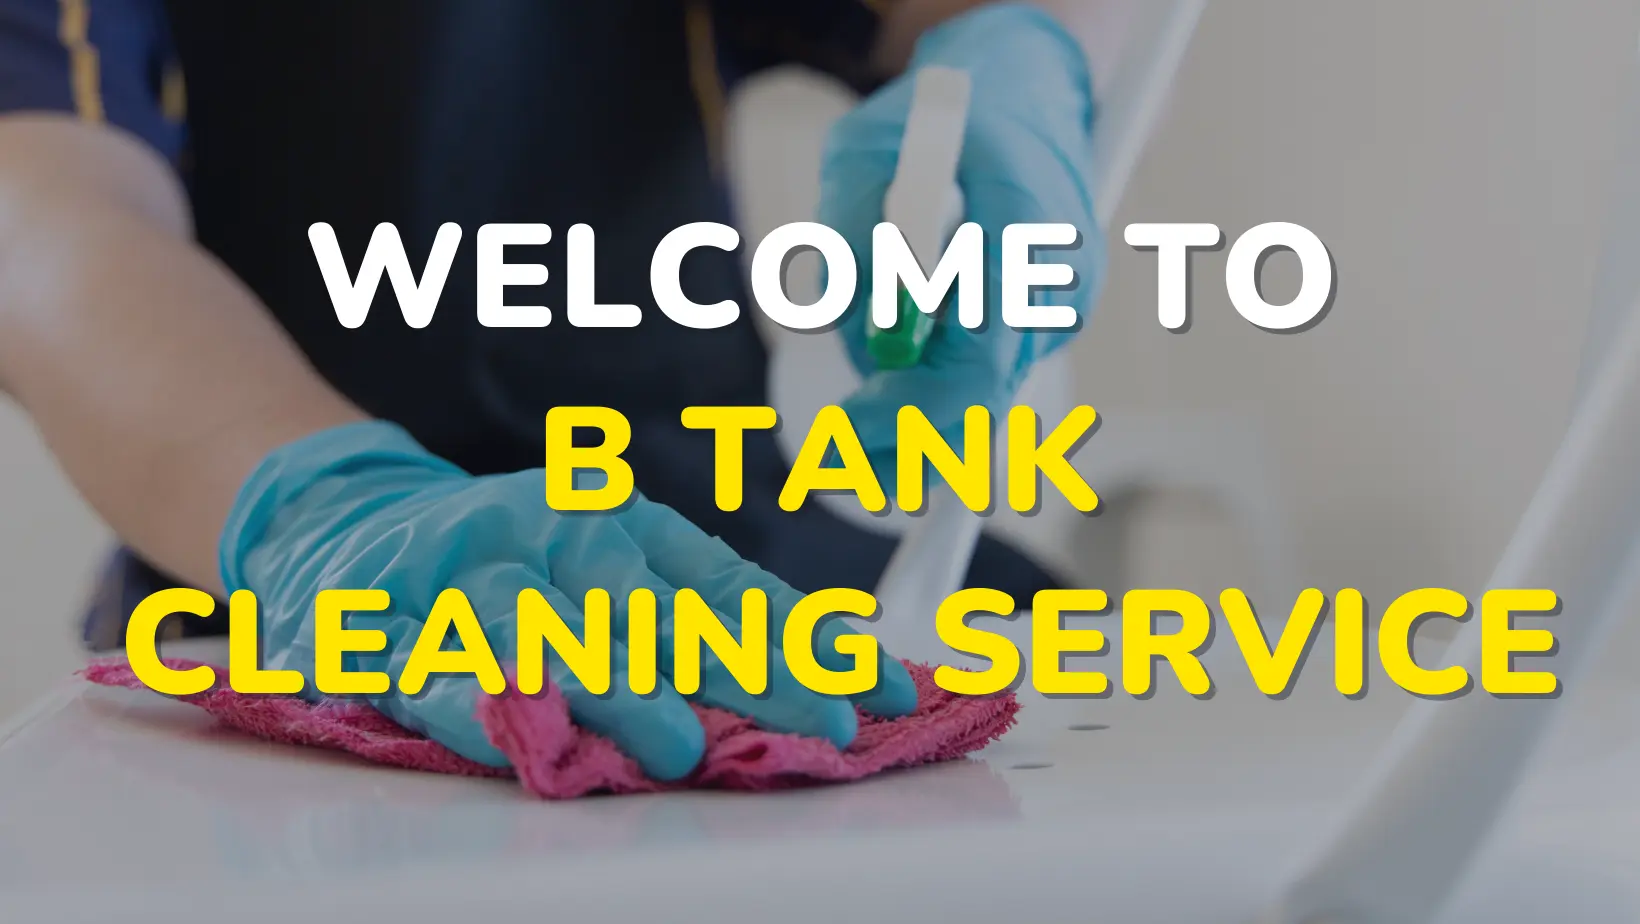 Welcome to B tank Cleaning Service